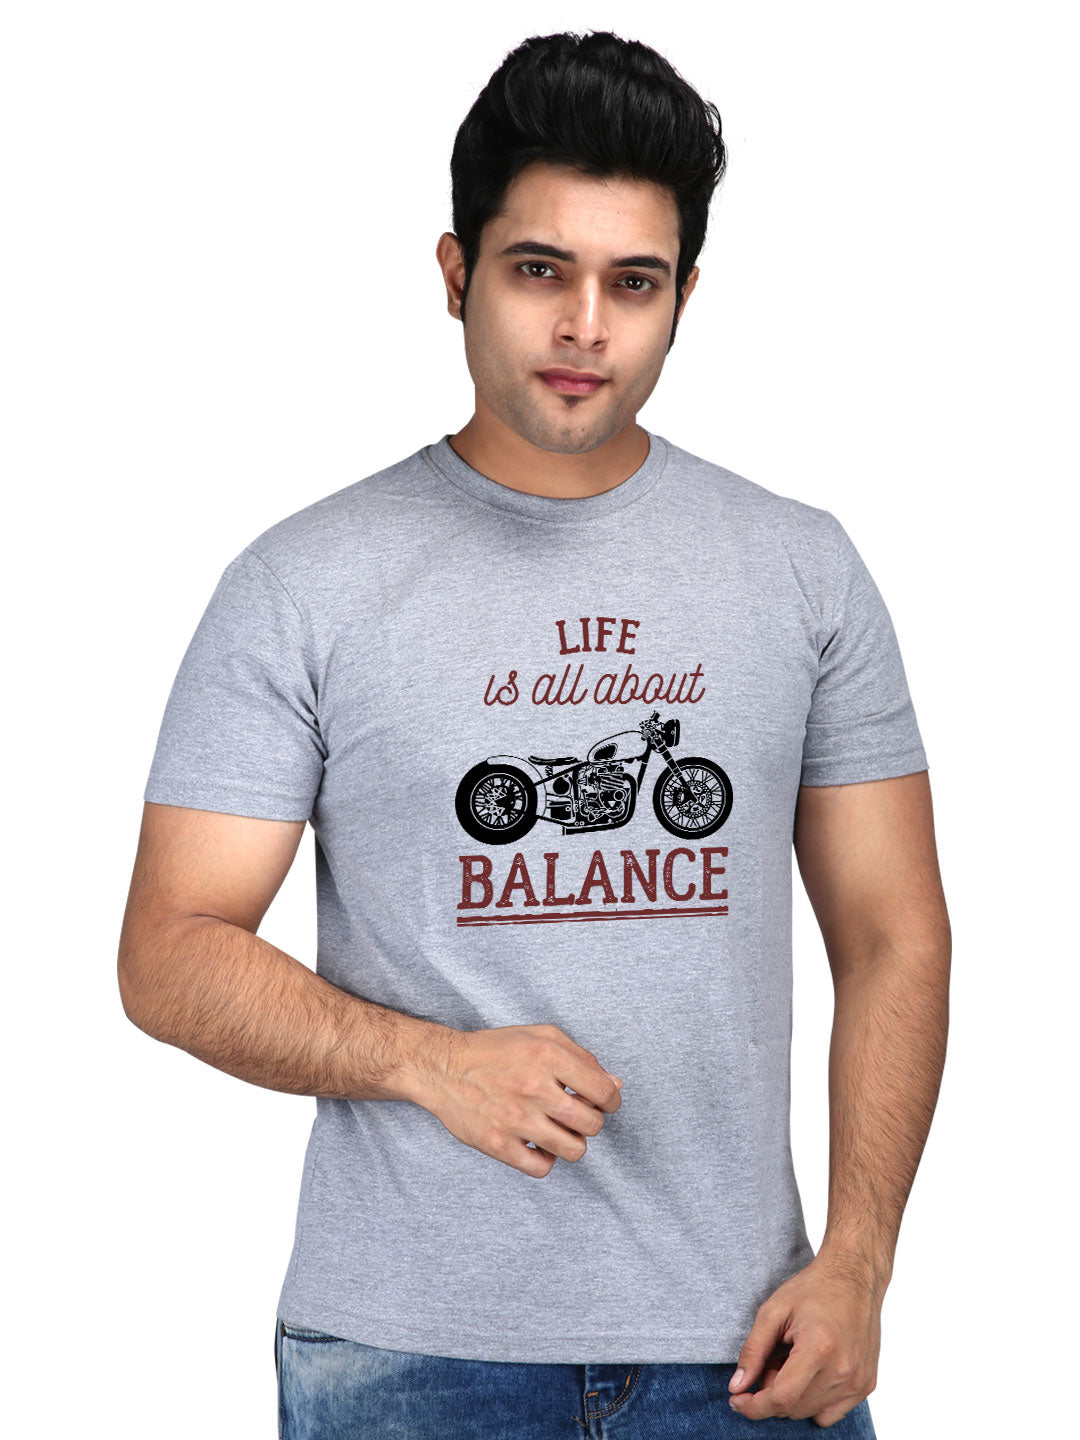 Life Is All About Balance - Premium Round Neck Cotton Tees for Men - Grey Melange